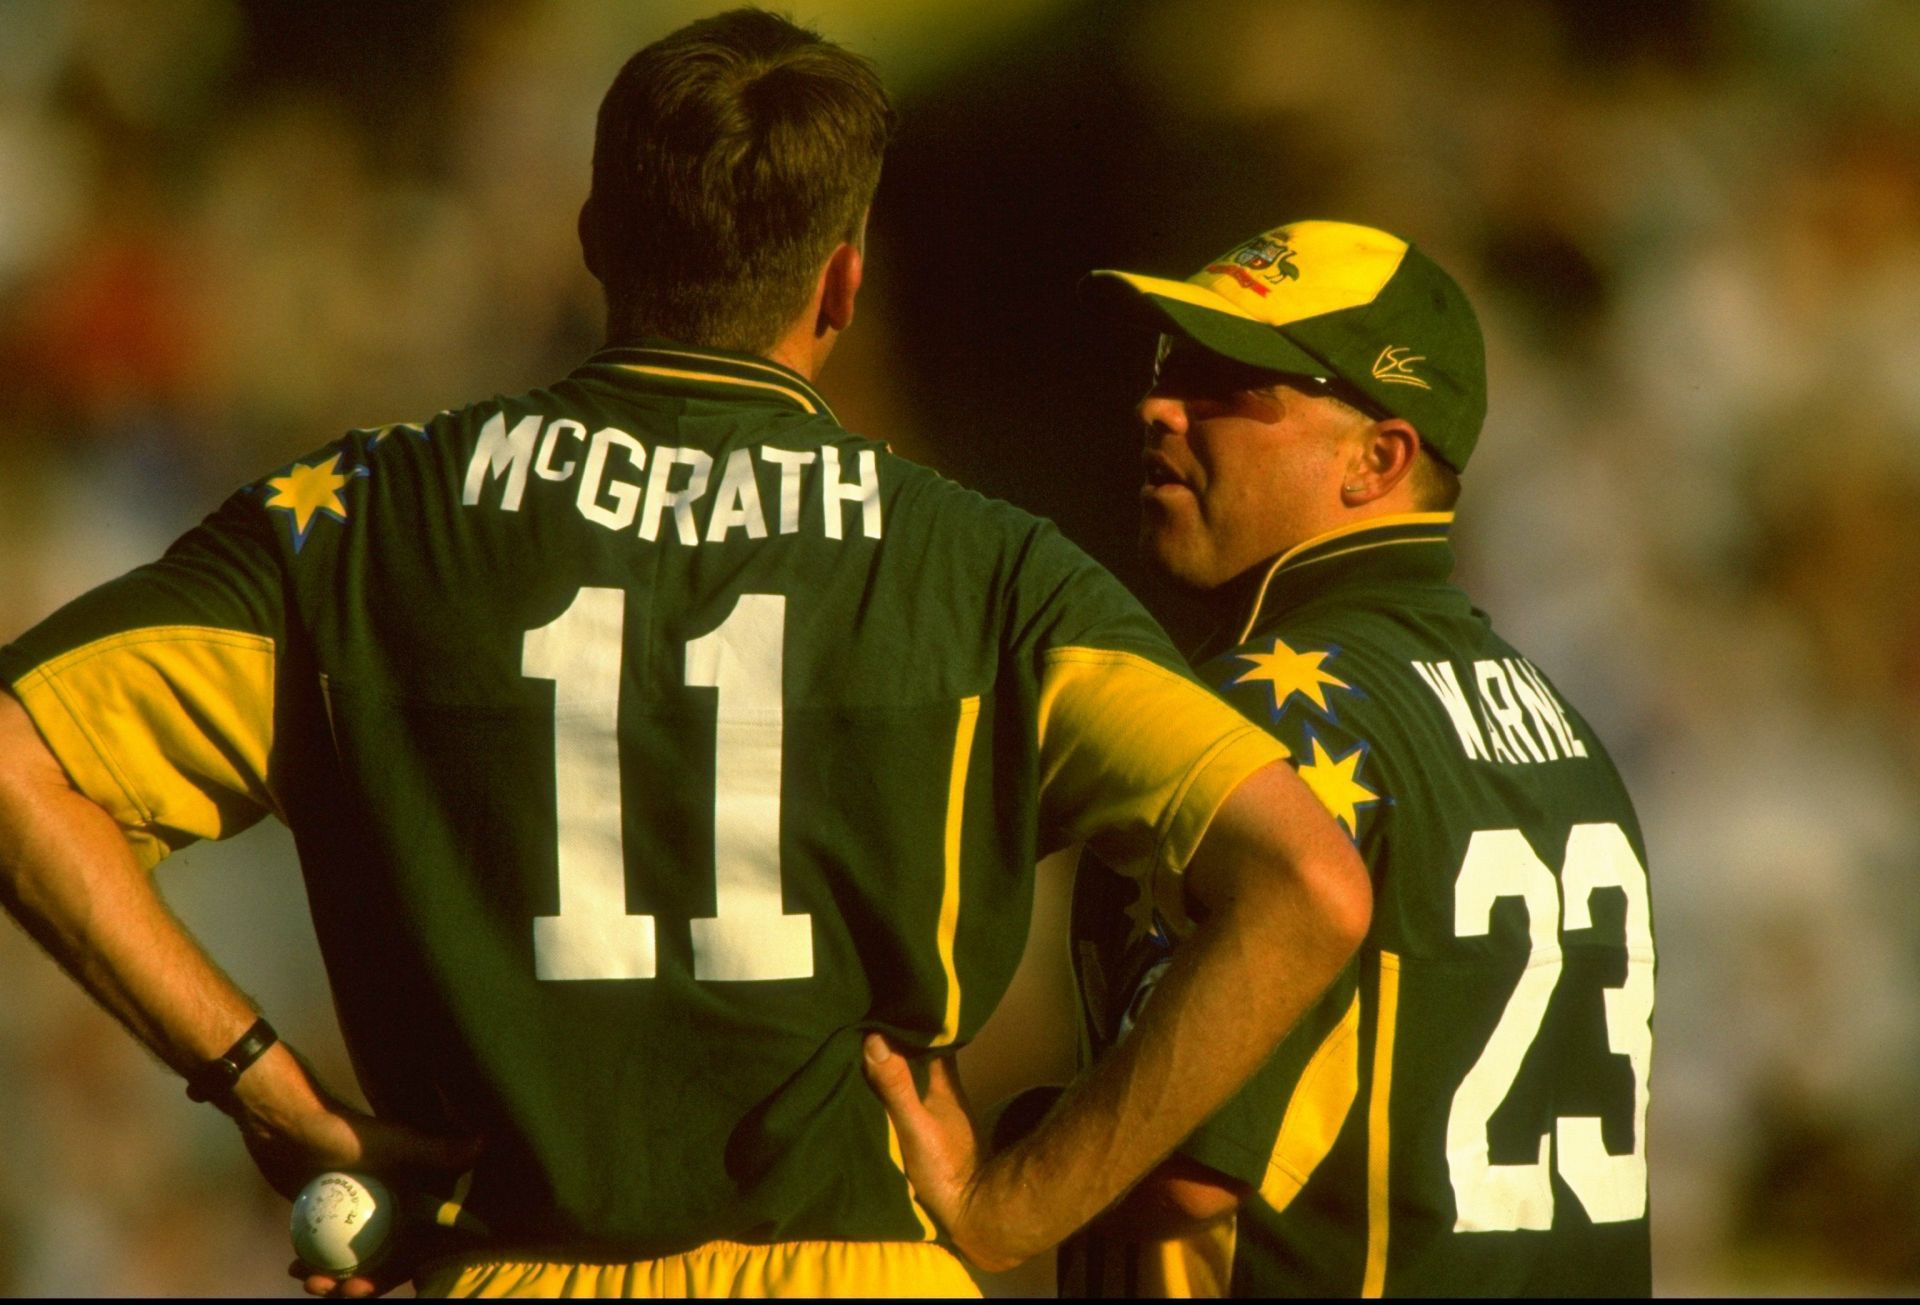 Glenn McGrath and Shane Warne are unarguably regarded as two of Australia&rsquo;s greatest match-winners. The duo are seen in discussion during the first final of the Carlton and United One Day Series against England at the Sydney Cricket Ground in February 1999. Pic: Getty Images